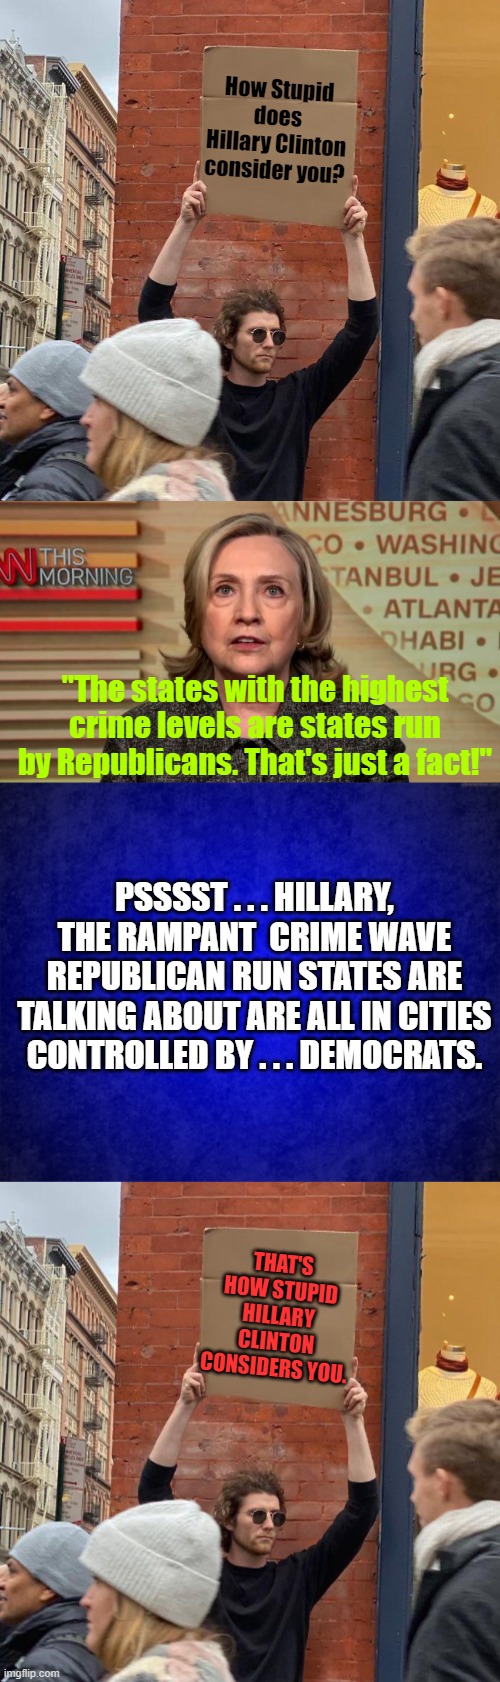 Basically Hillary Clinton has contempt for everyone.  It just saves time and energy for her. | How Stupid does Hillary Clinton consider you? "The states with the highest crime levels are states run by Republicans. That's just a fact!"; PSSSST . . . HILLARY, THE RAMPANT  CRIME WAVE REPUBLICAN RUN STATES ARE TALKING ABOUT ARE ALL IN CITIES CONTROLLED BY . . . DEMOCRATS. THAT'S HOW STUPID HILLARY CLINTON CONSIDERS YOU. | image tagged in guy holding cardboard sign | made w/ Imgflip meme maker